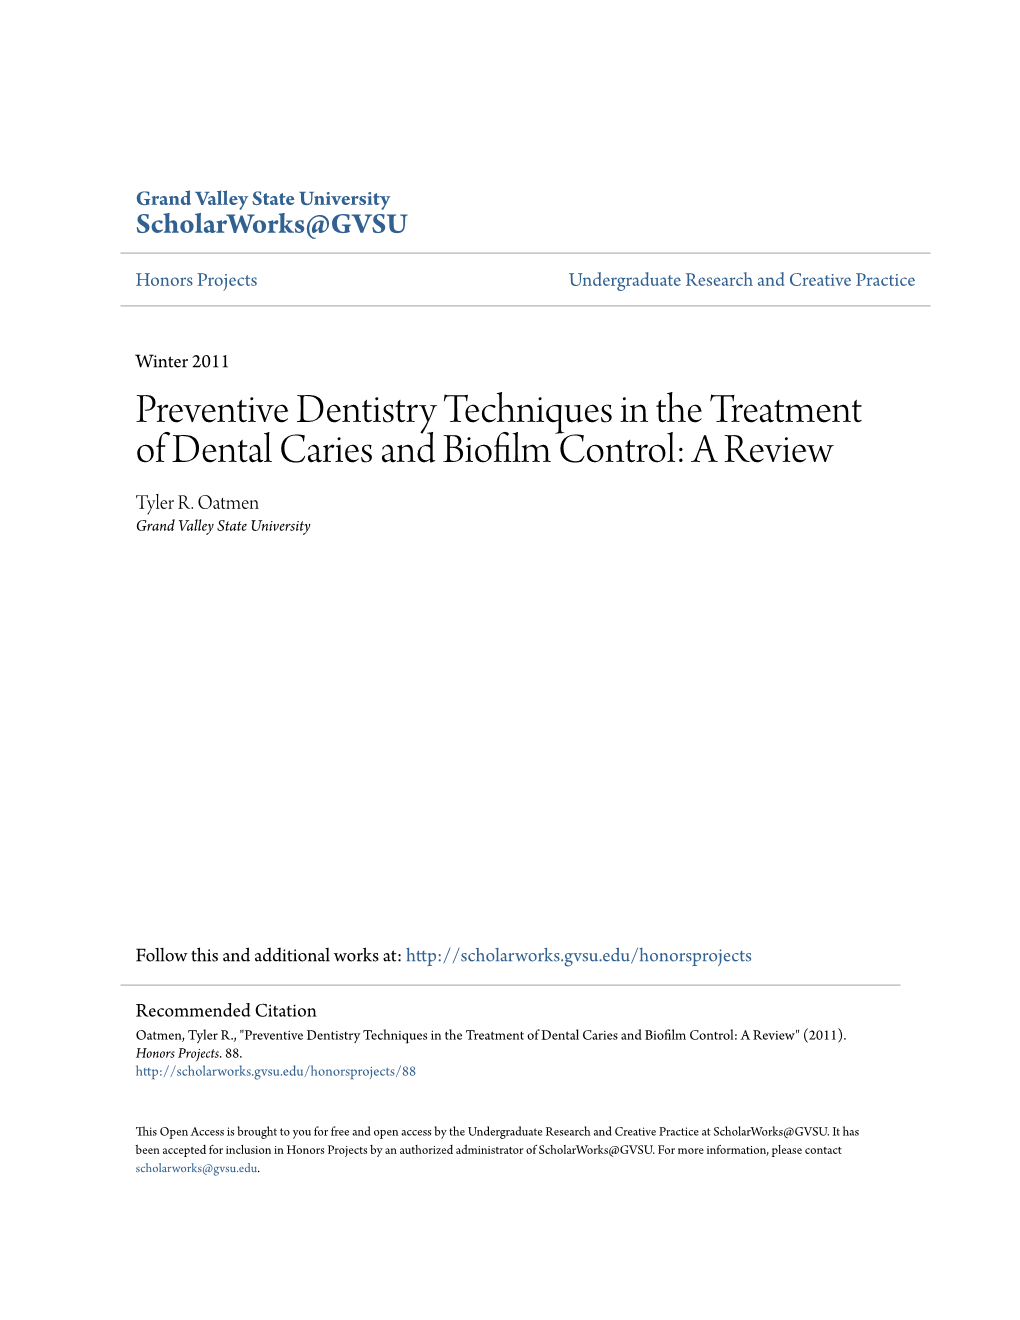 Preventive Dentistry Techniques in the Treatment of Dental Caries and Biofilm Control: a Review Tyler R